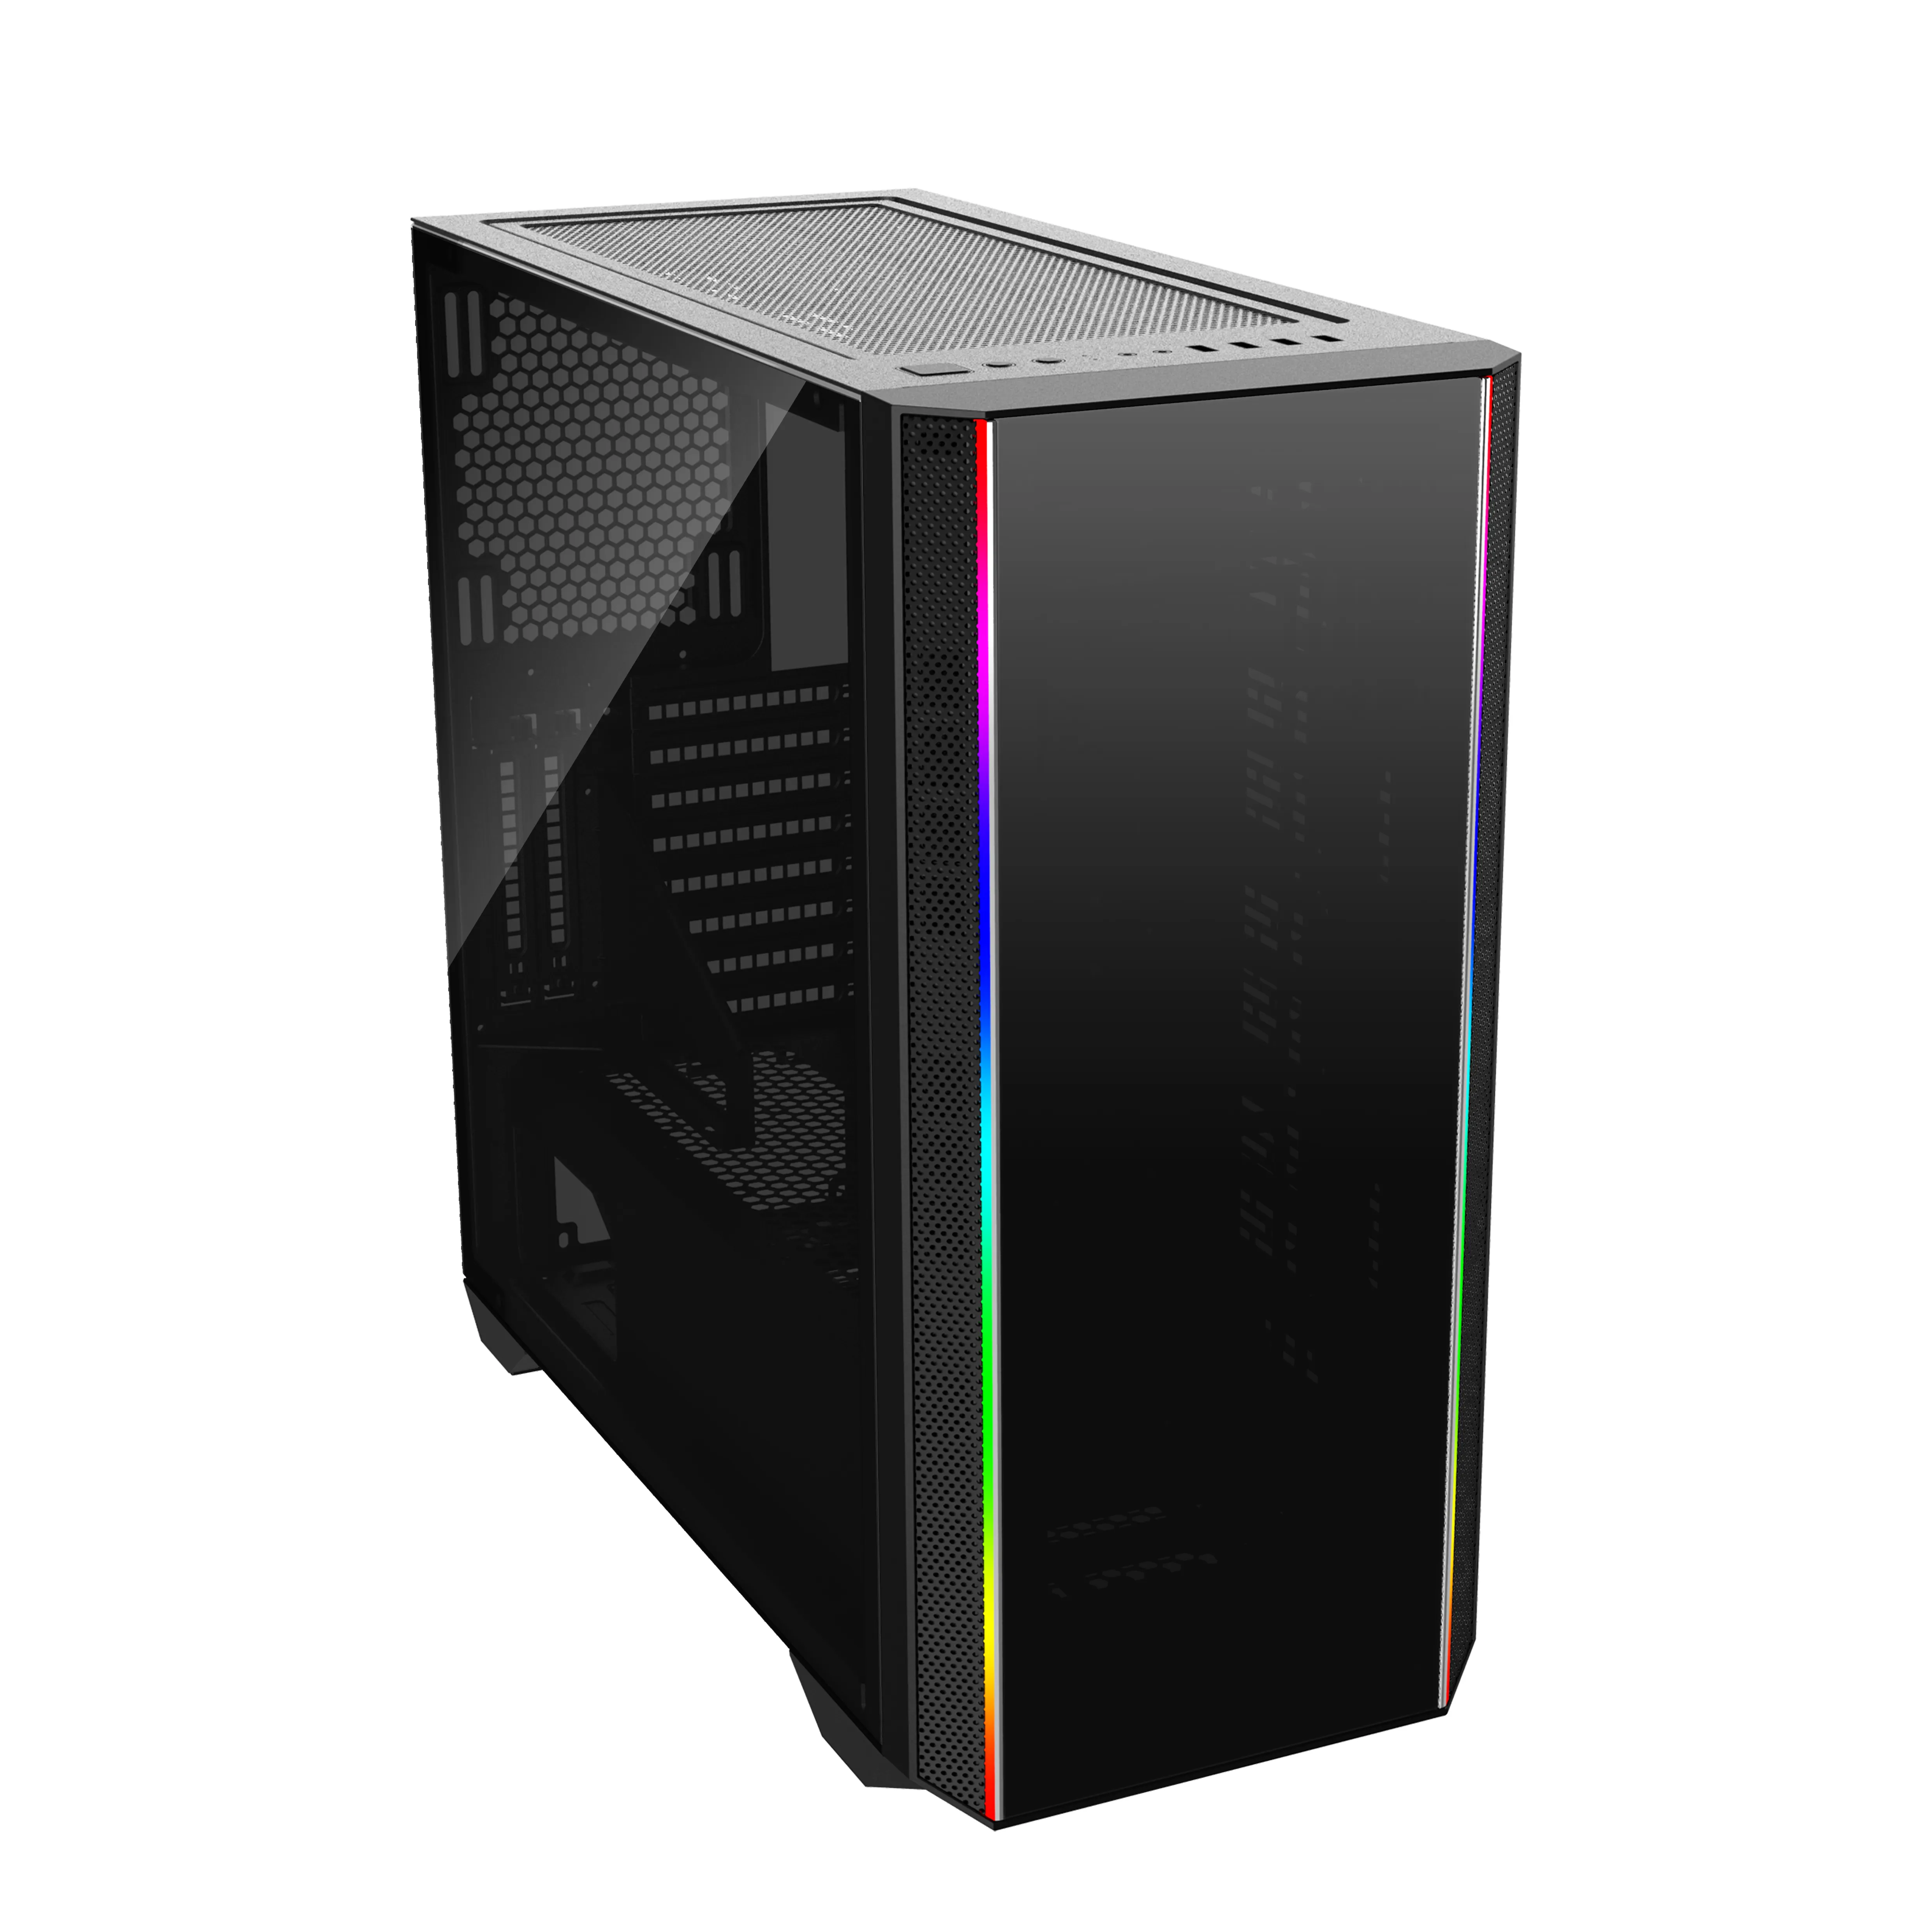 PCCOOLER hot sale cool computer cases computer case 0.8mmSPCC Panel ABS+ Tempered Glass pc chasis